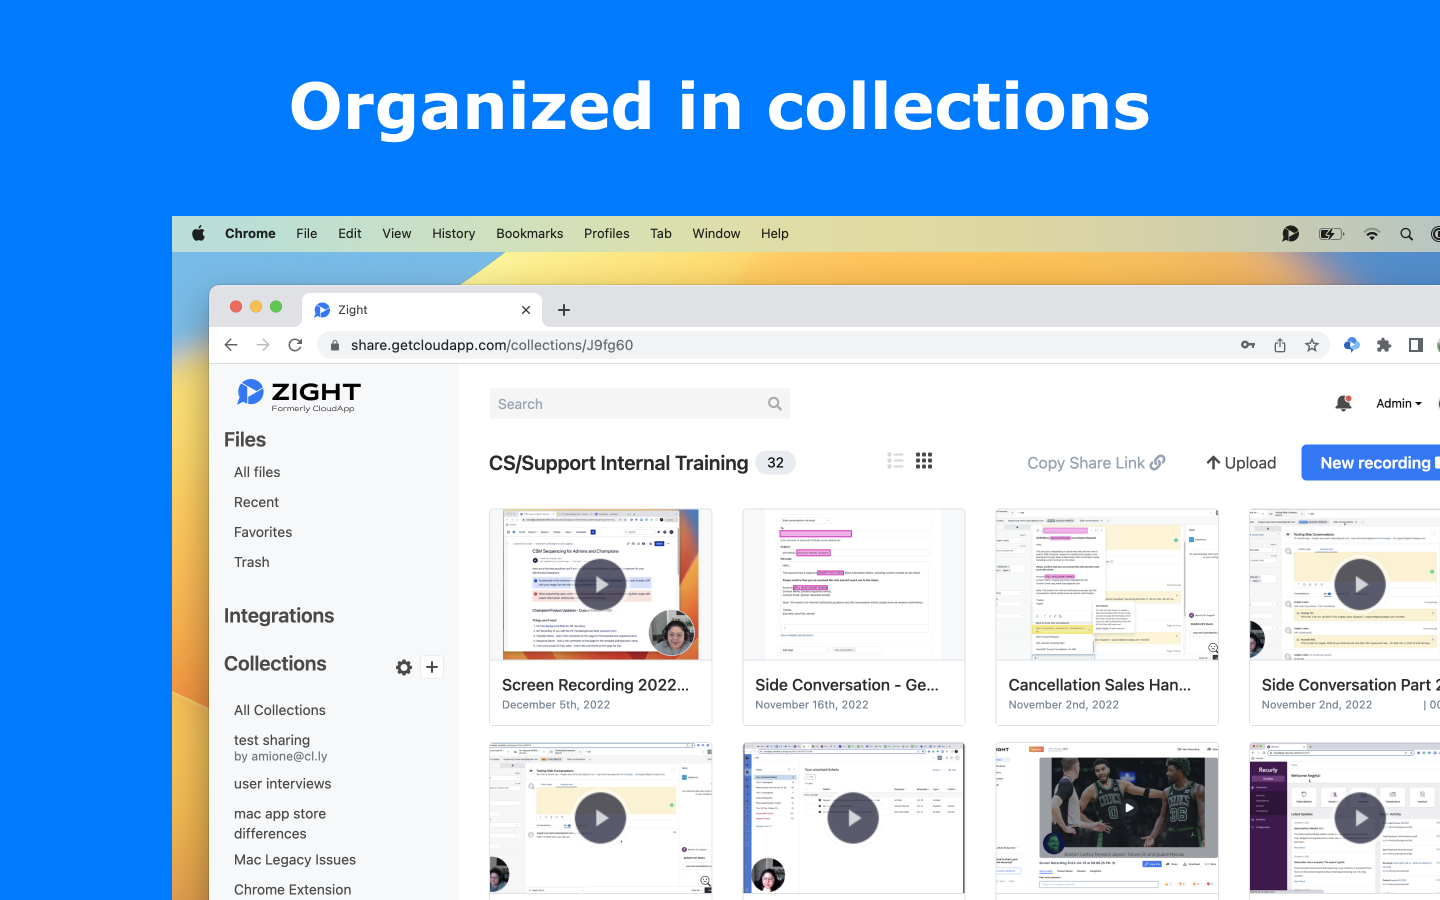 Organize in Collections